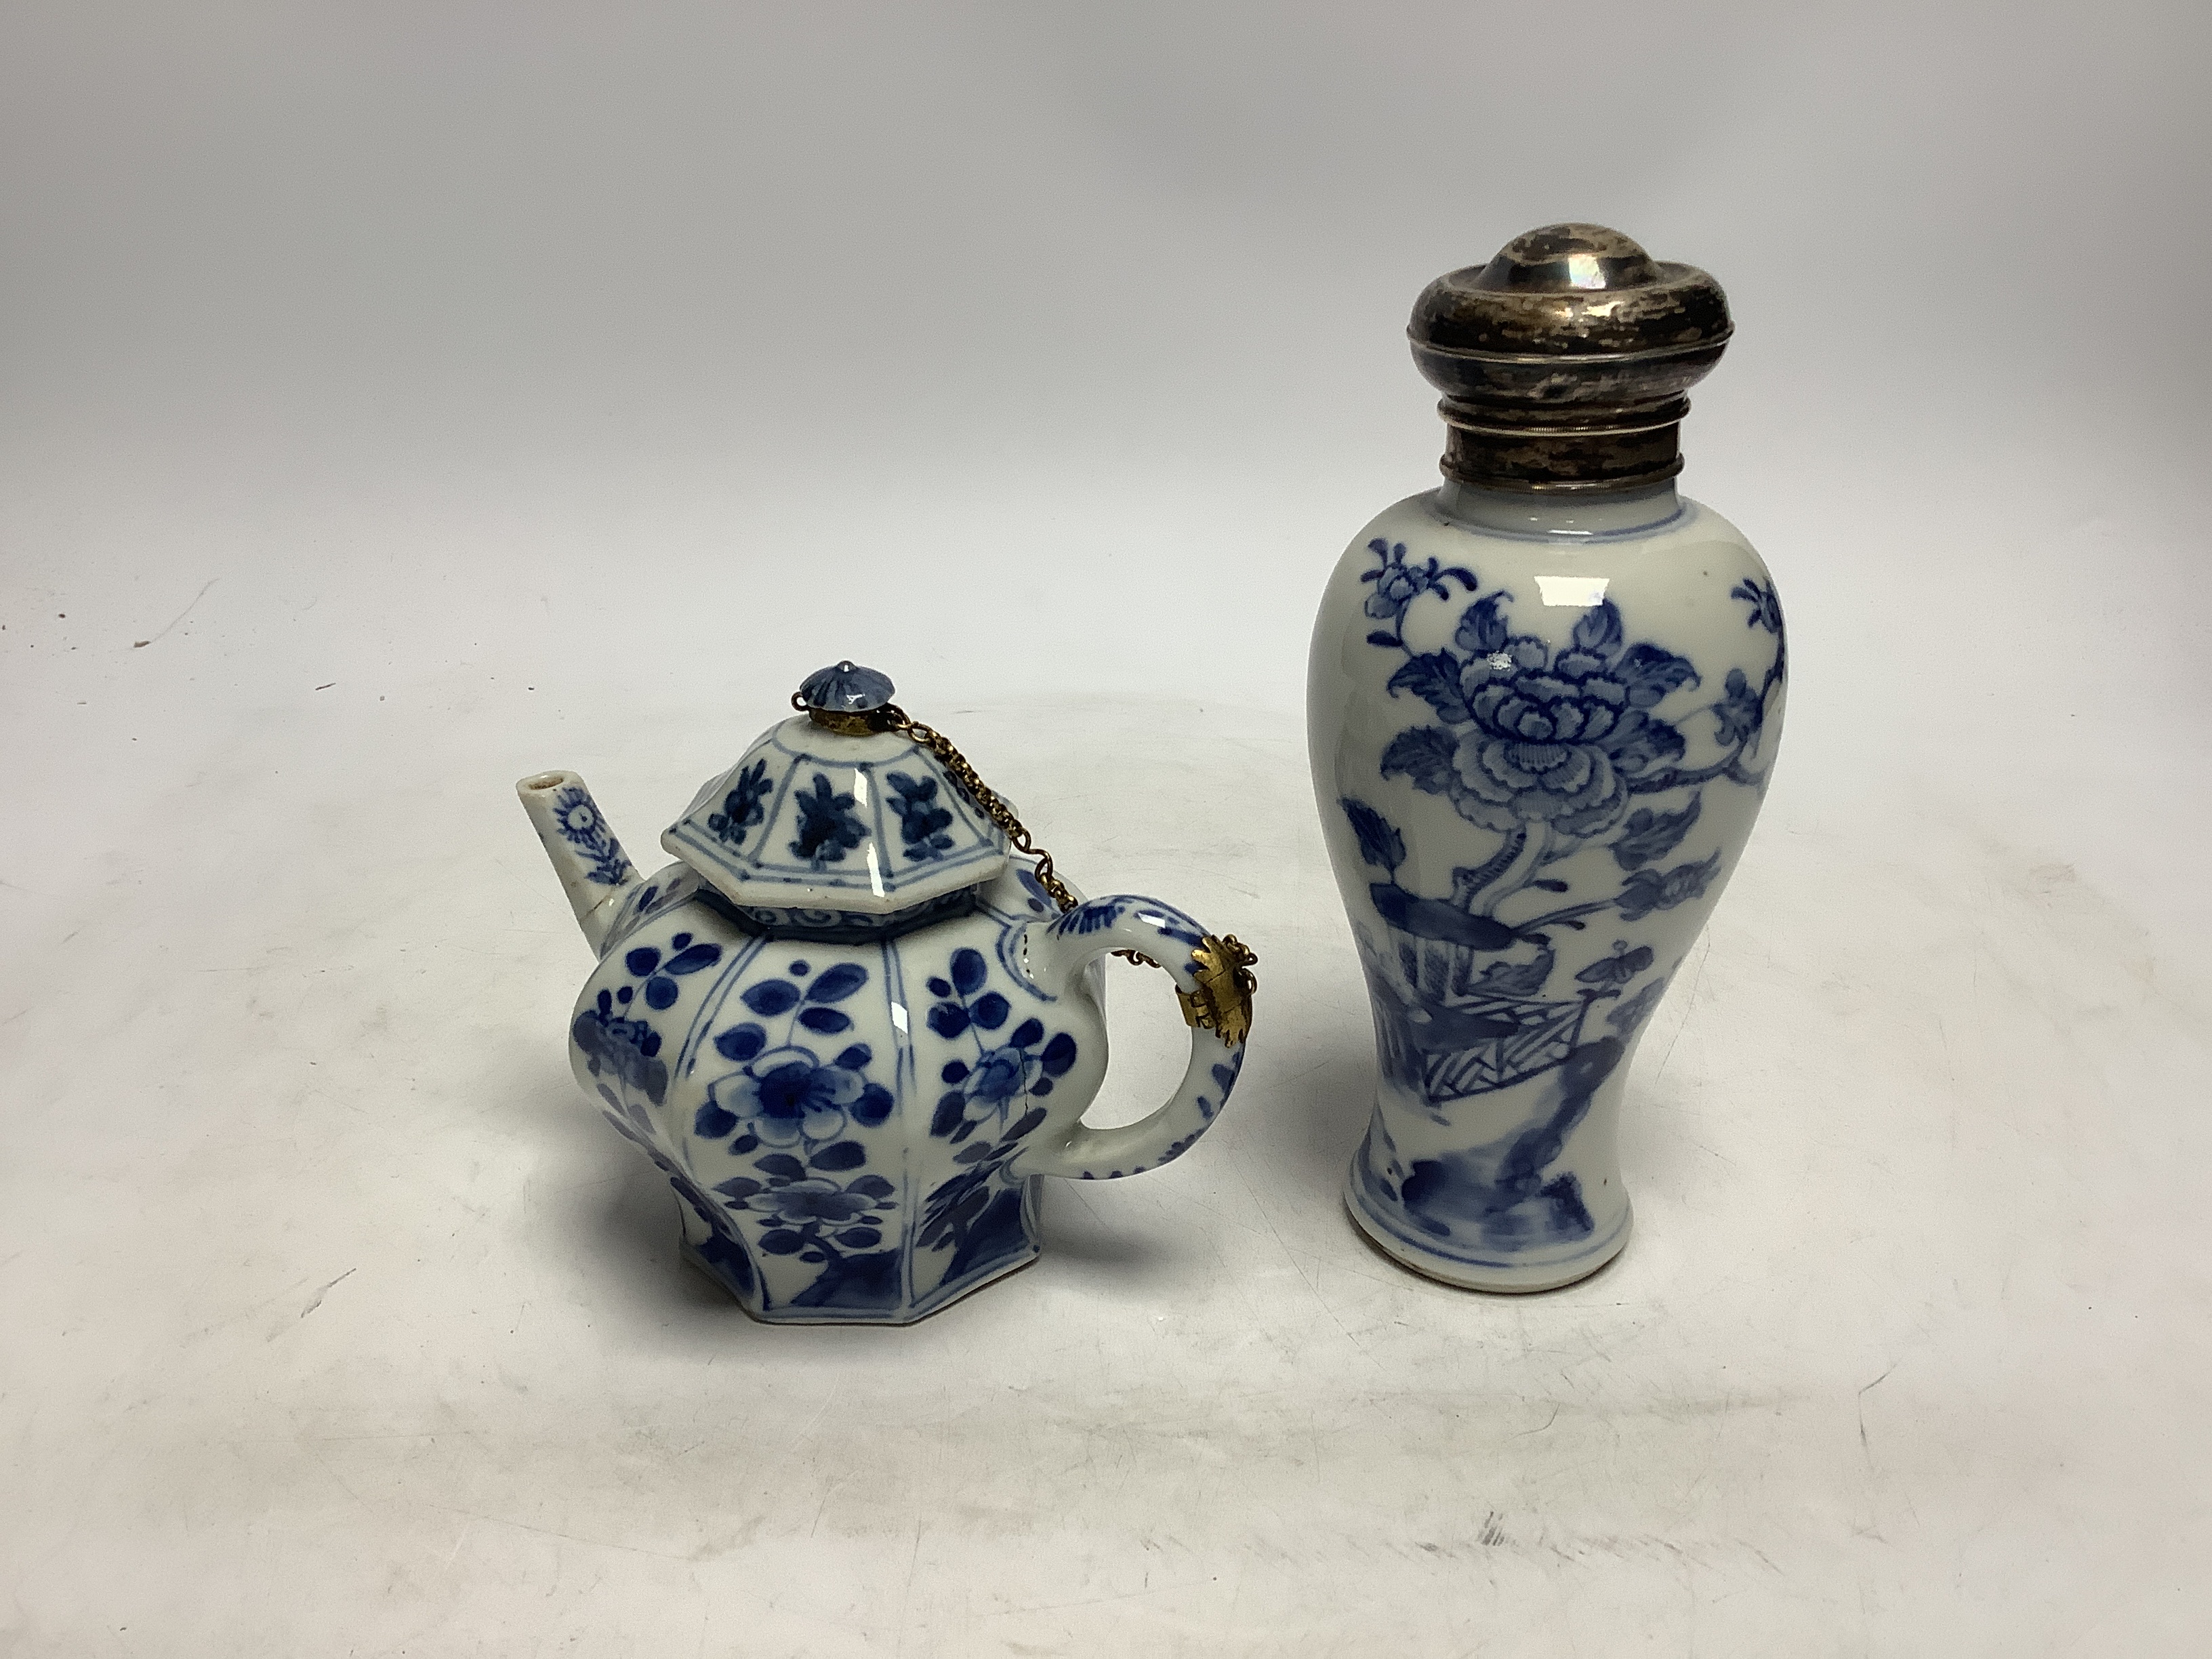 A Chinese blue and white octagonal teapot and cover with gilt metal mounts and a blue and white baluster vase, 16.5cm high, both 18th century